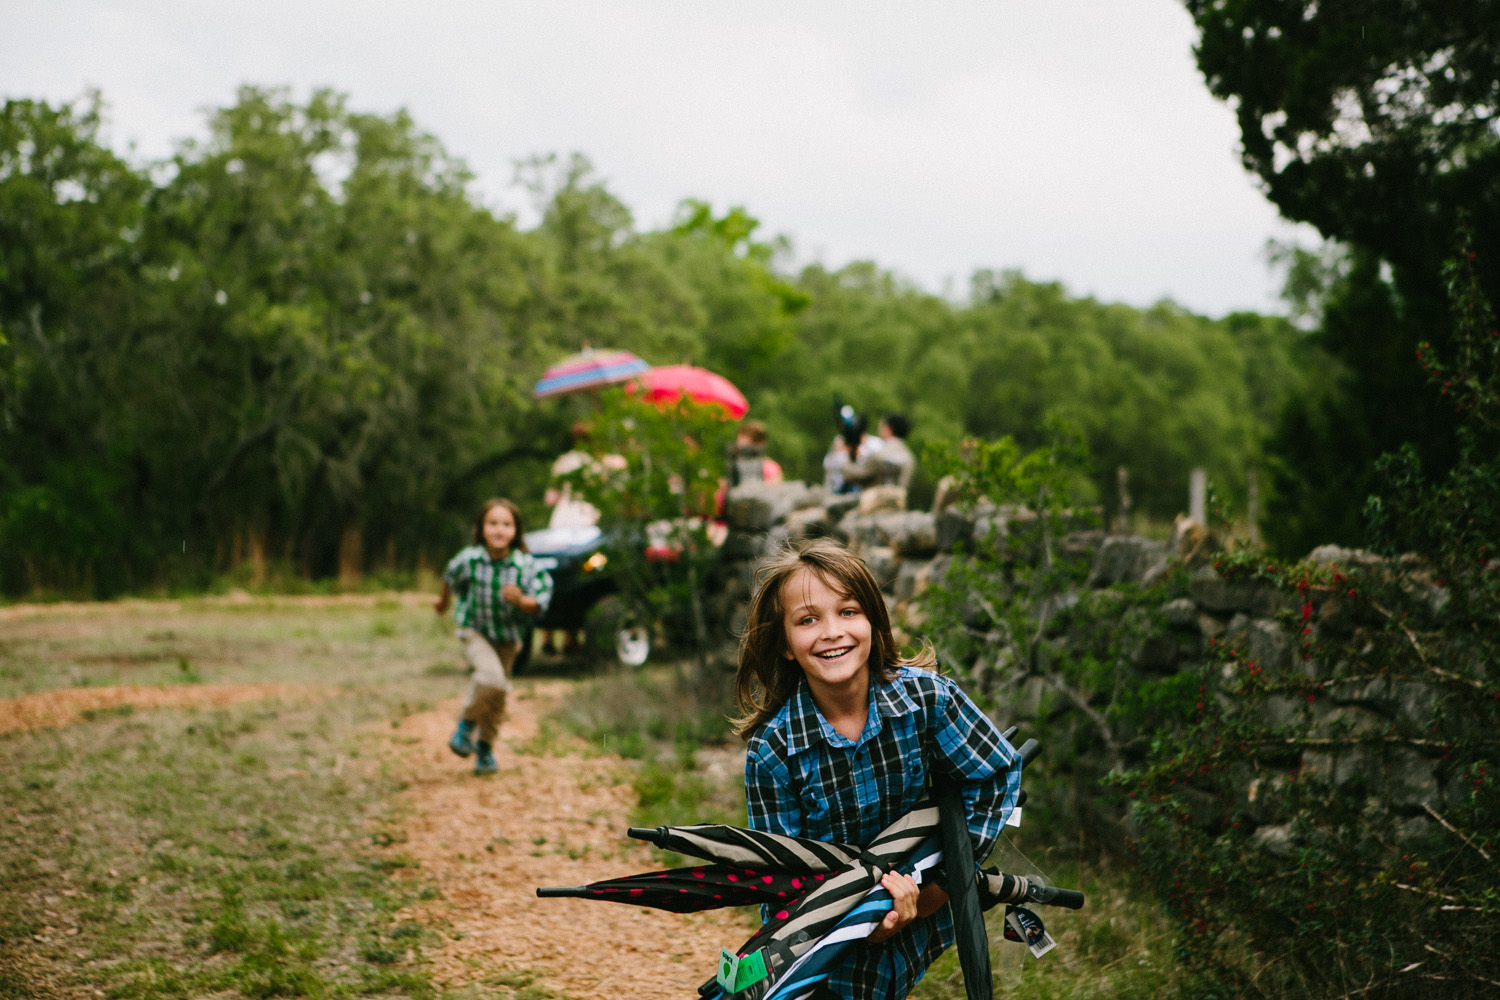 Kids Helping at Wedding | Home Ranch Wedding | Lisa Woods Photography